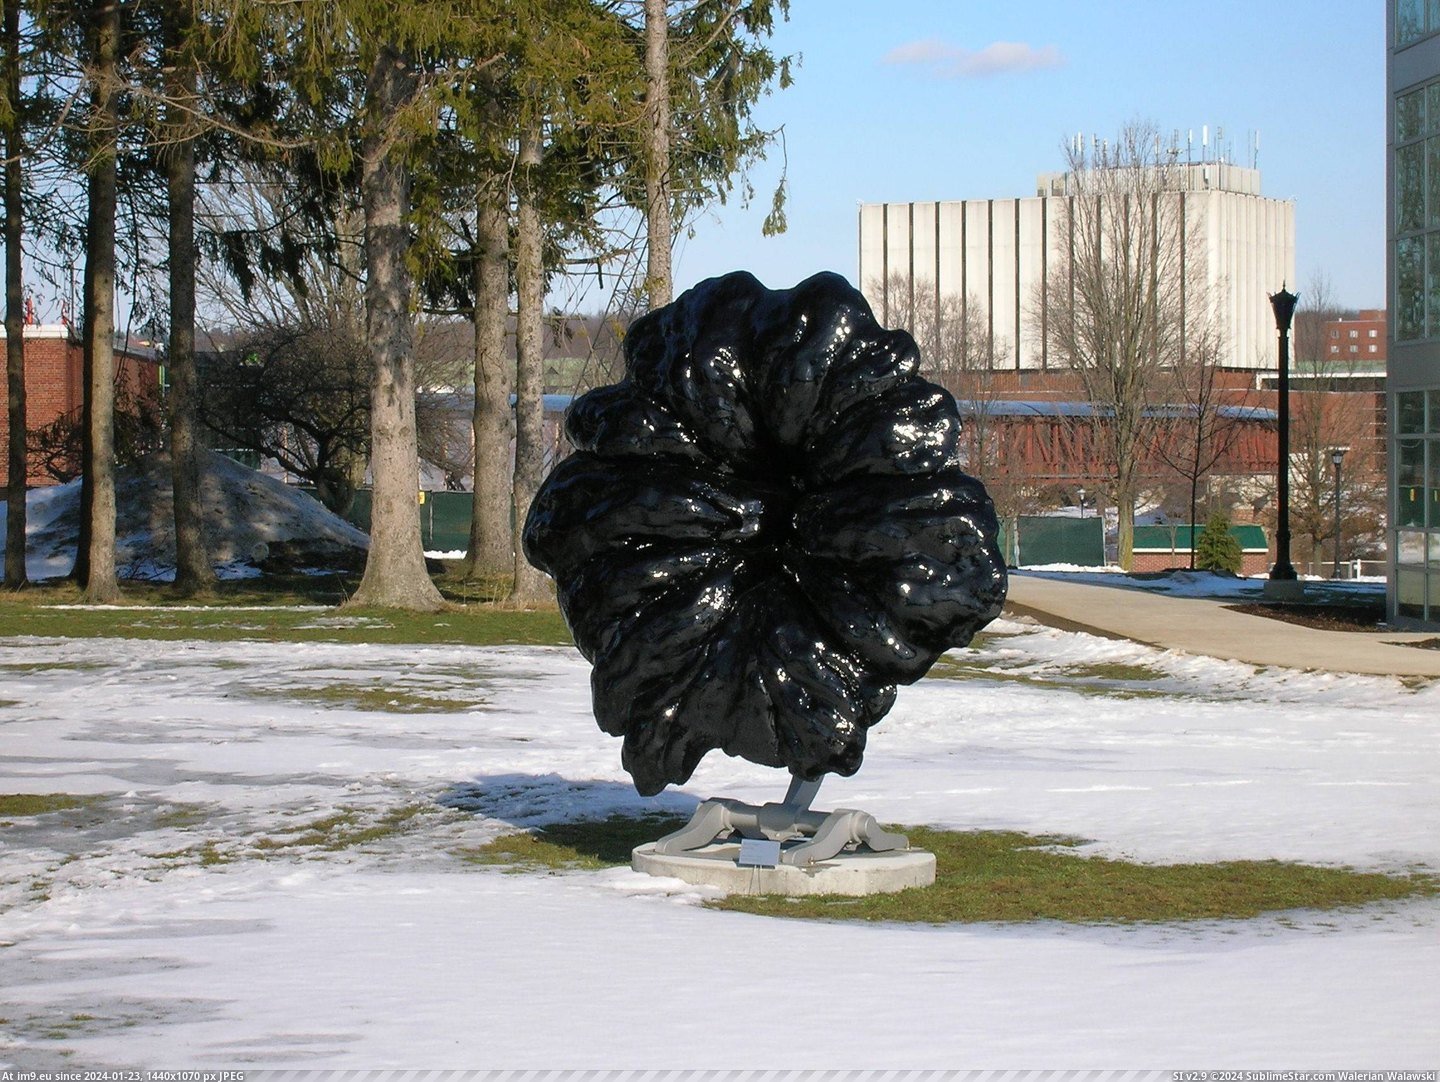 #Wtf #Art #Flower #Statue #Exhibits #Tha #Edinboro #Student #University #Showed [Wtf] A student at Edinboro University made this 'flower' statue and showed it in art exhibits. He later came forth and said tha Pic. (Изображение из альбом My r/WTF favs))